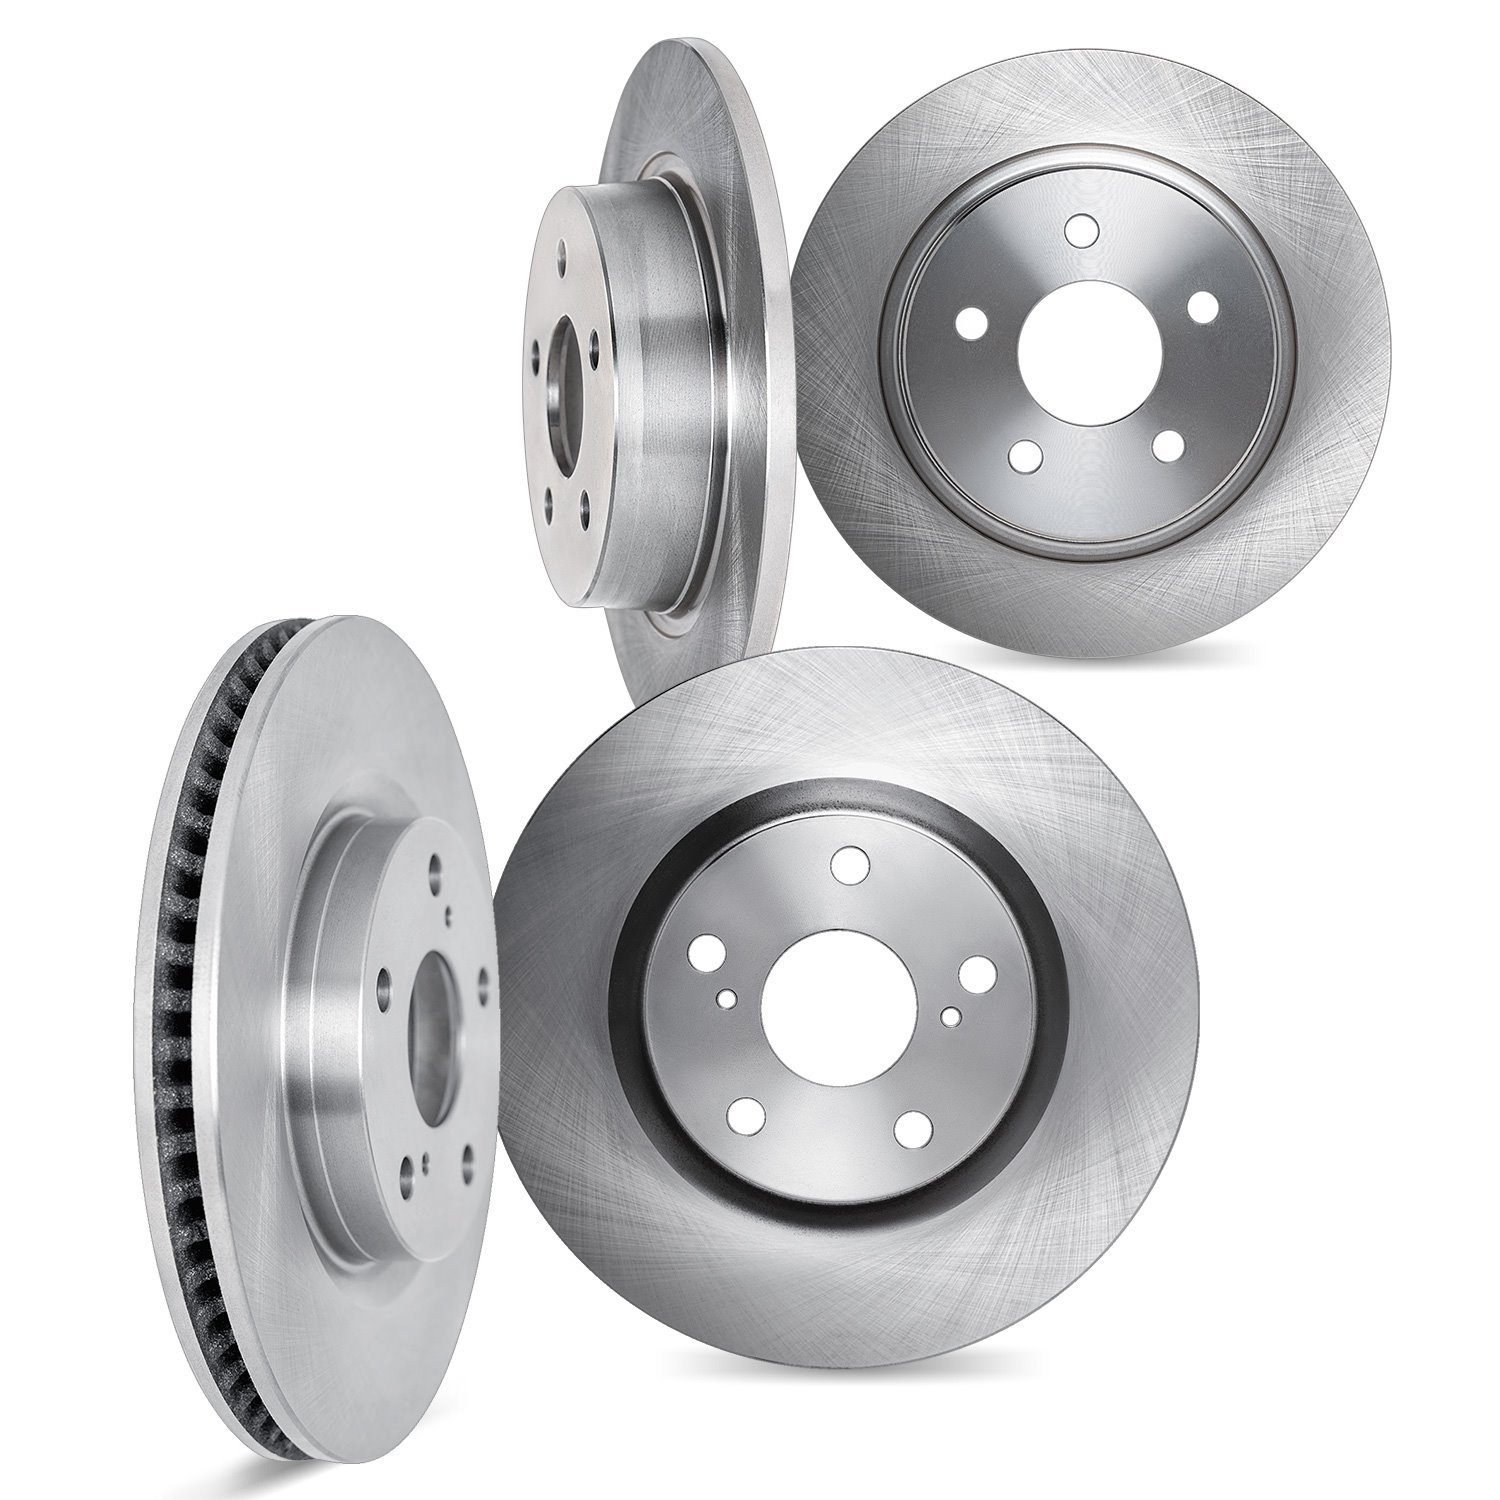 6004-42002 Brake Rotors, Fits Select Mopar, Position: Front and Rear